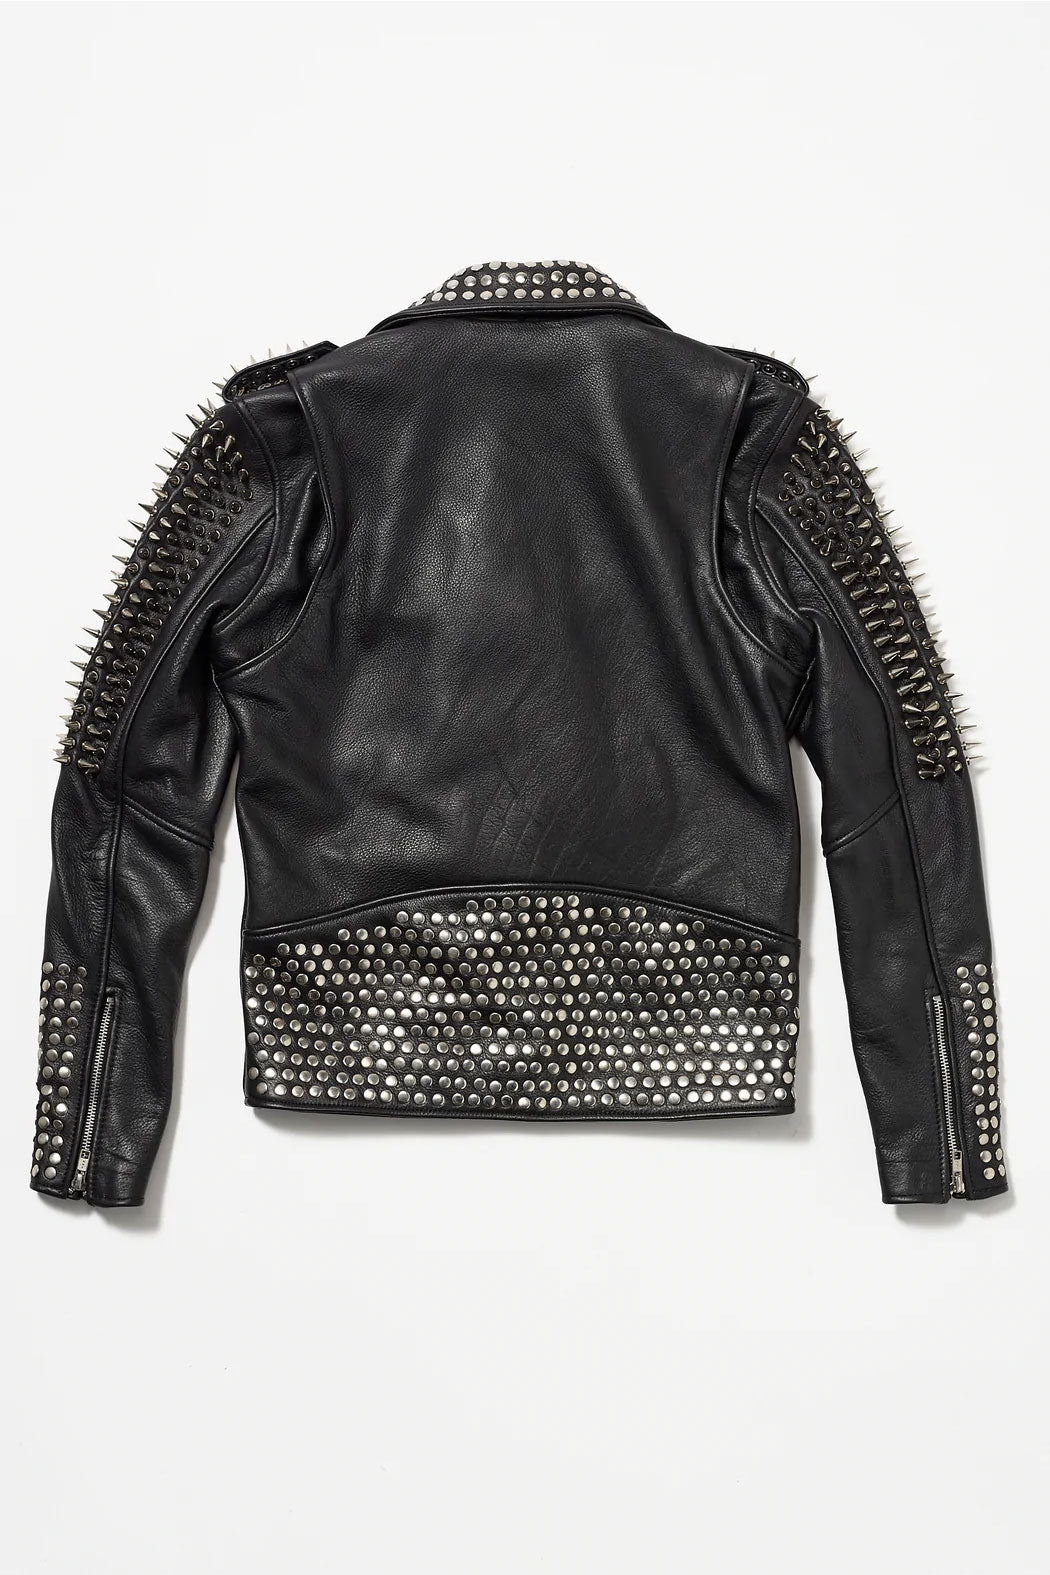 Black Punk Silver Studded Long Spiked Lather Jacket For Women